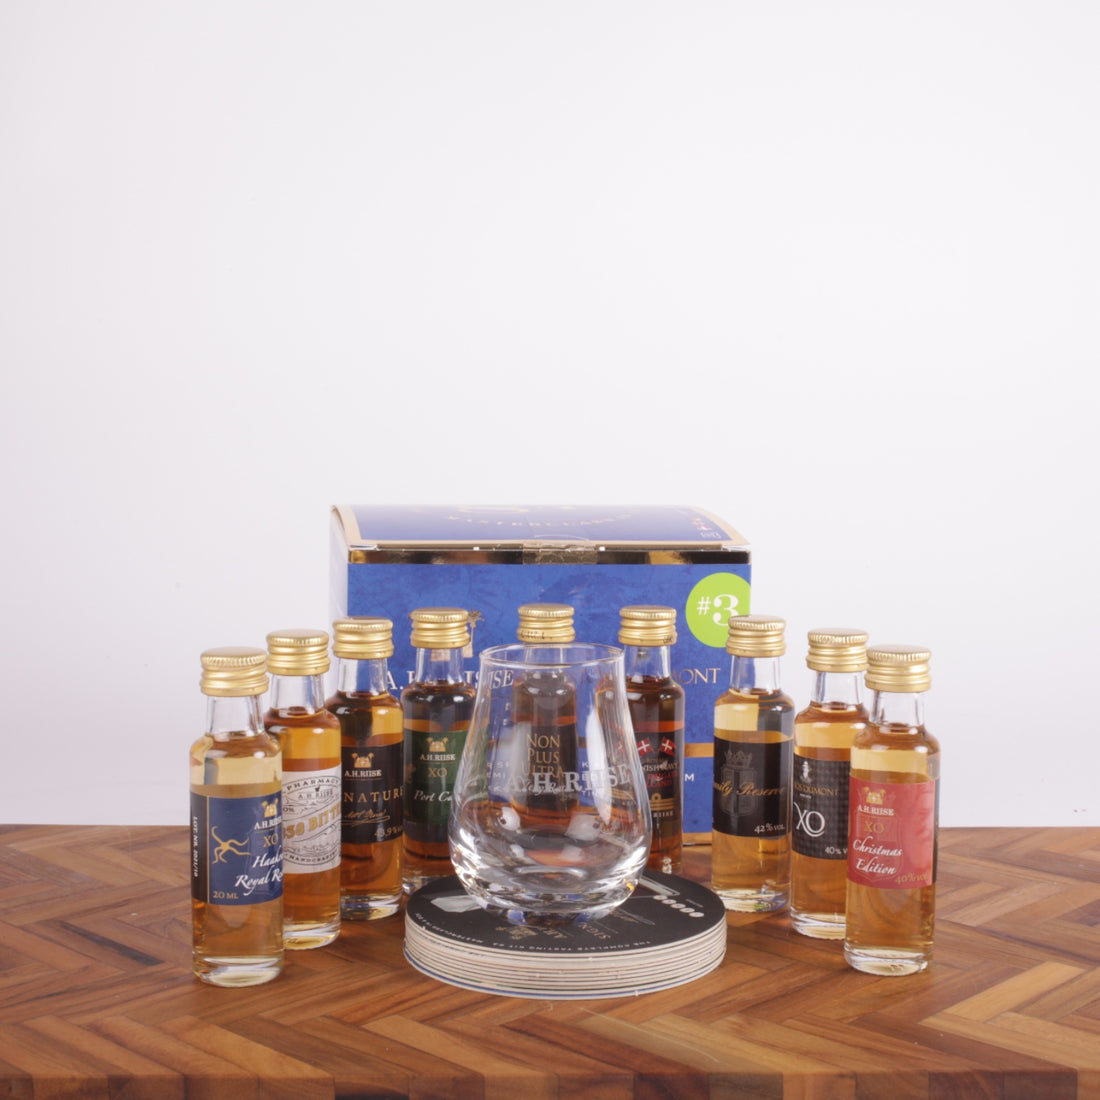 A.H. RIISE TASTING KIT